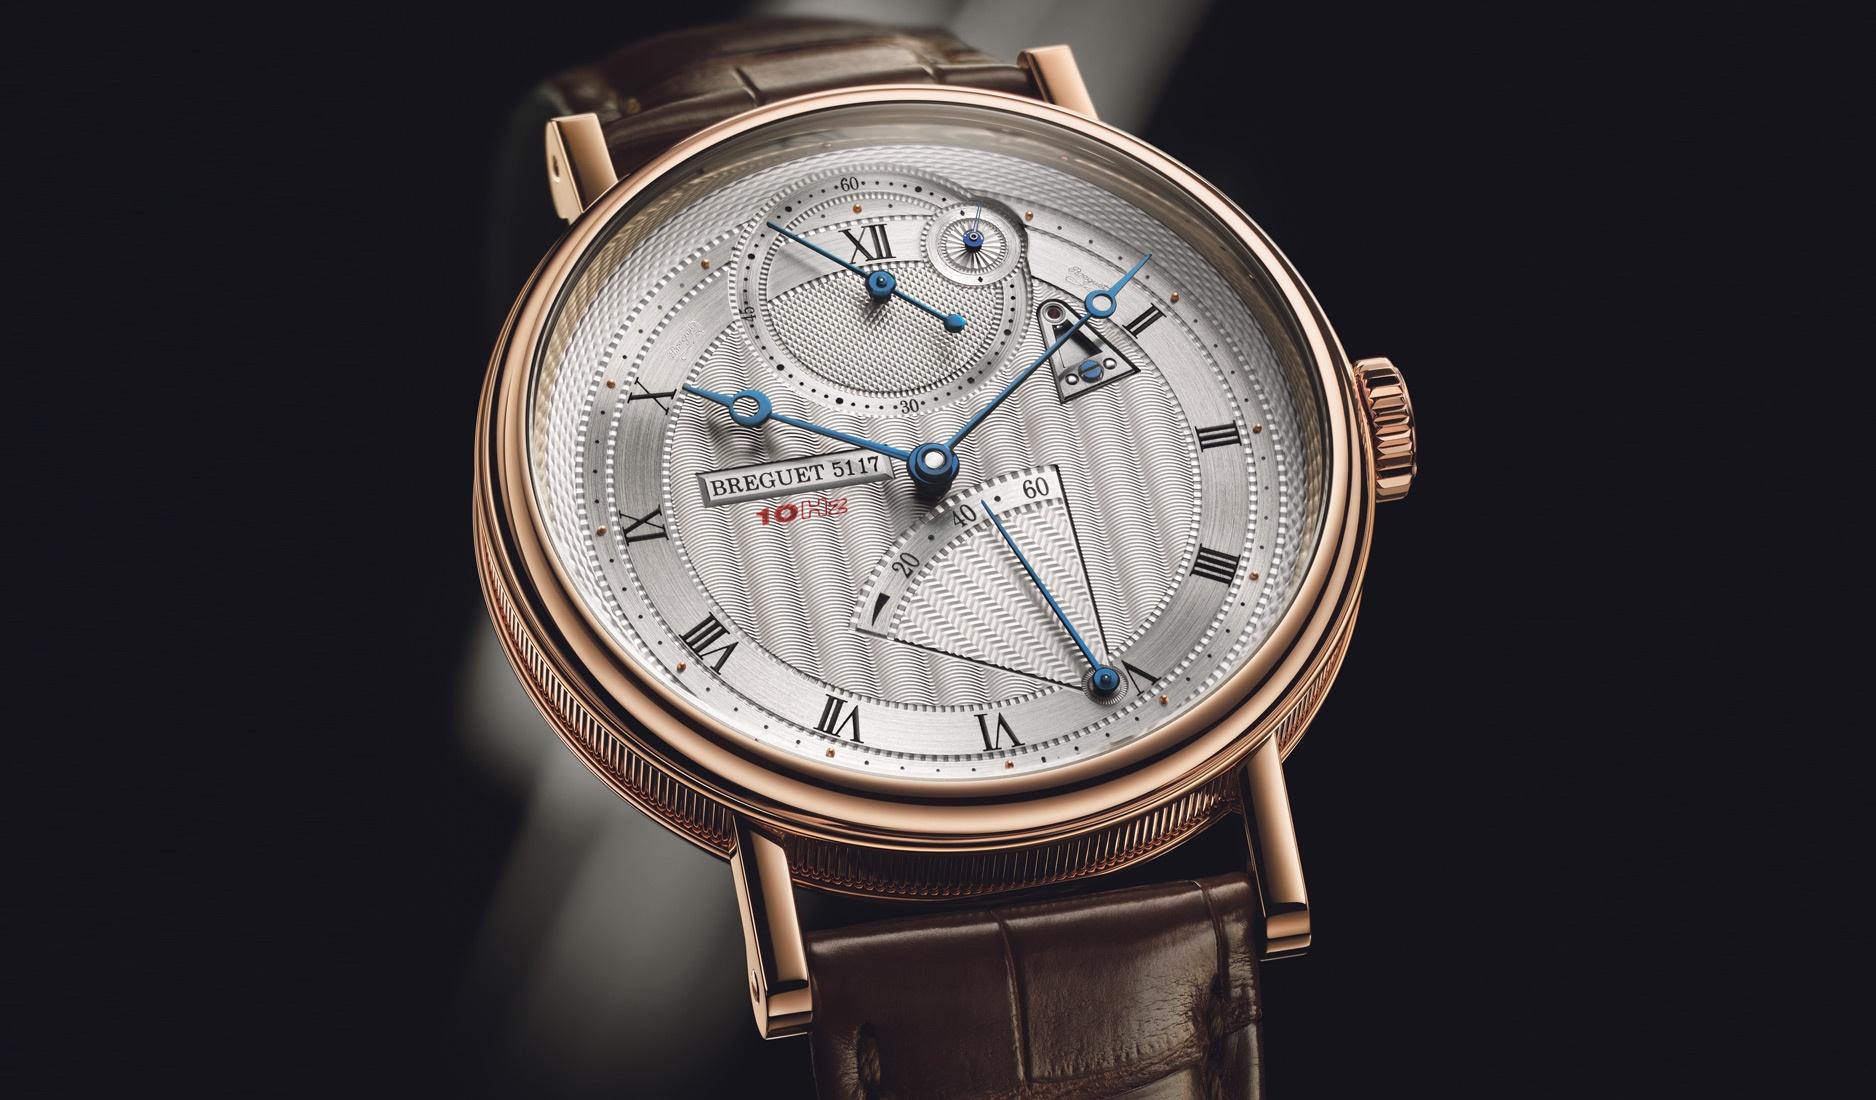 Breguet Classic Chroonmetrie 7727 with 72,000 vph movement